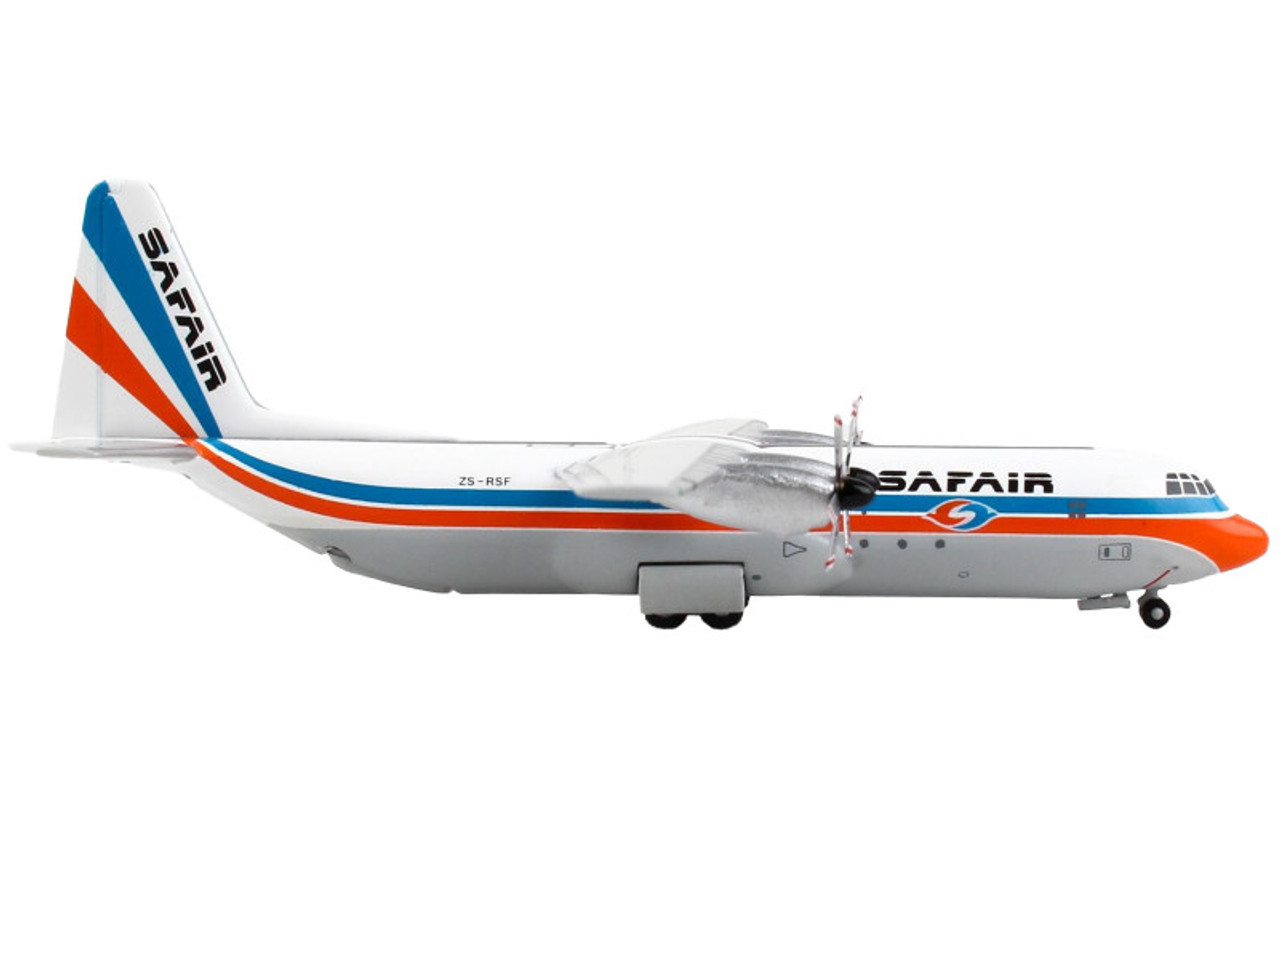 Lockheed L-100-30 Commercial Aircraft "Safair" White with Blue and Orange Stripes 1/400 Diecast Model Airplane by GeminiJets